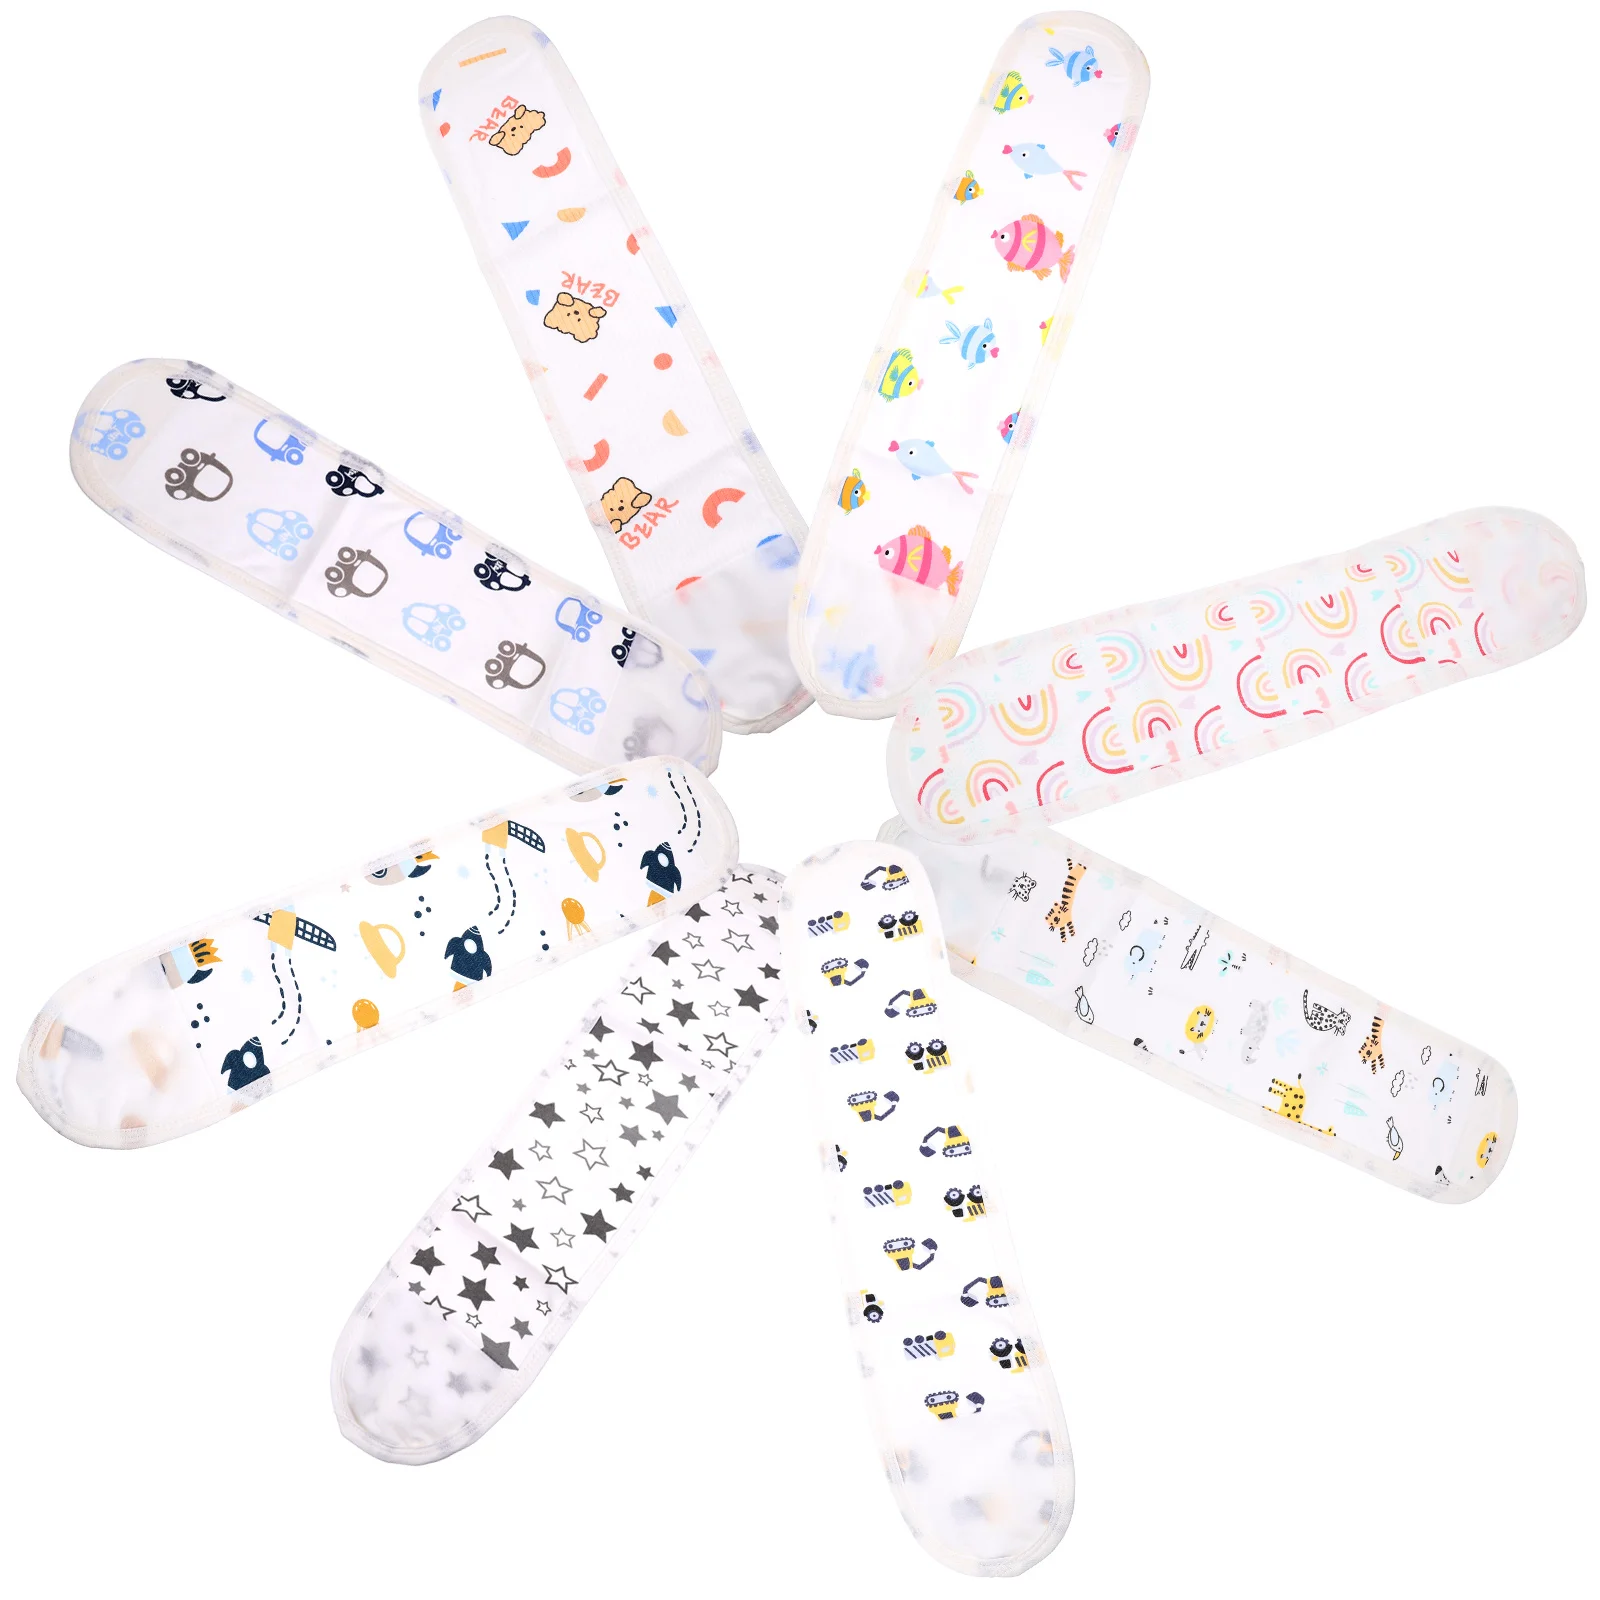 

8 Pcs Navel Cord Belt Baby‘s Belly Band Newborn Wrap Circumference Binders Belts Cotton Infant Umbilical Cords